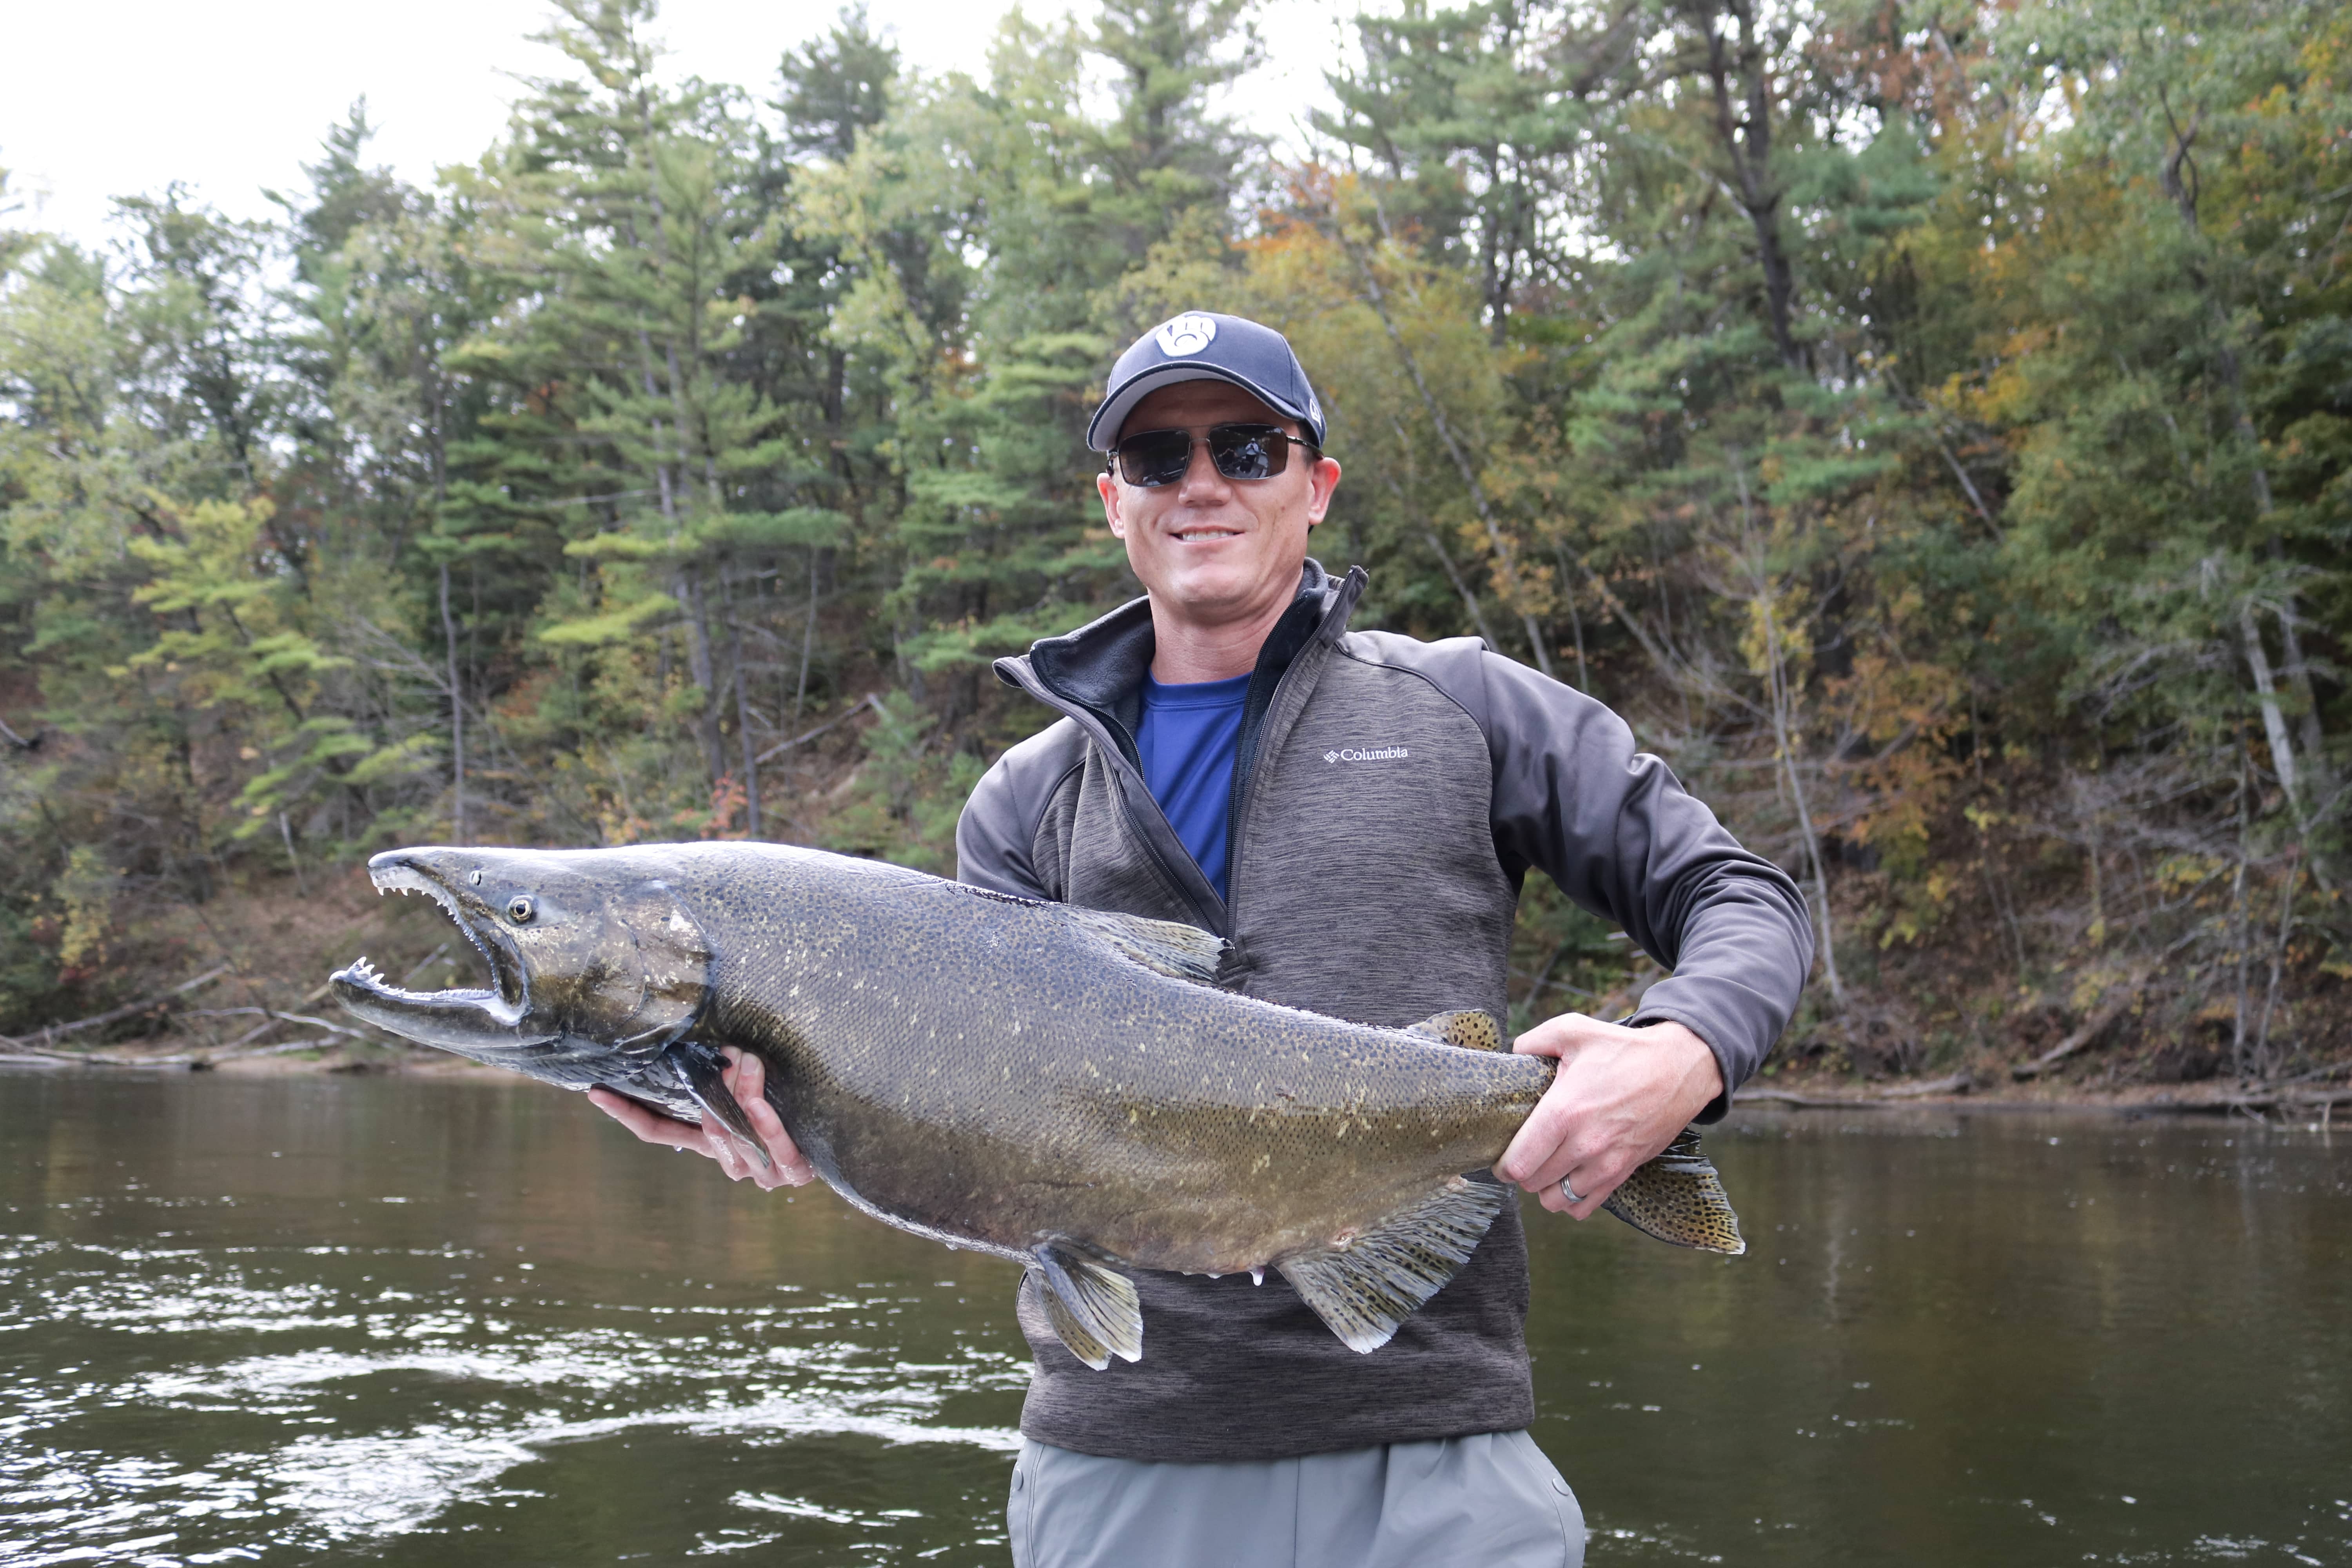 Massive King Salmon Caught On The Muskegon River!